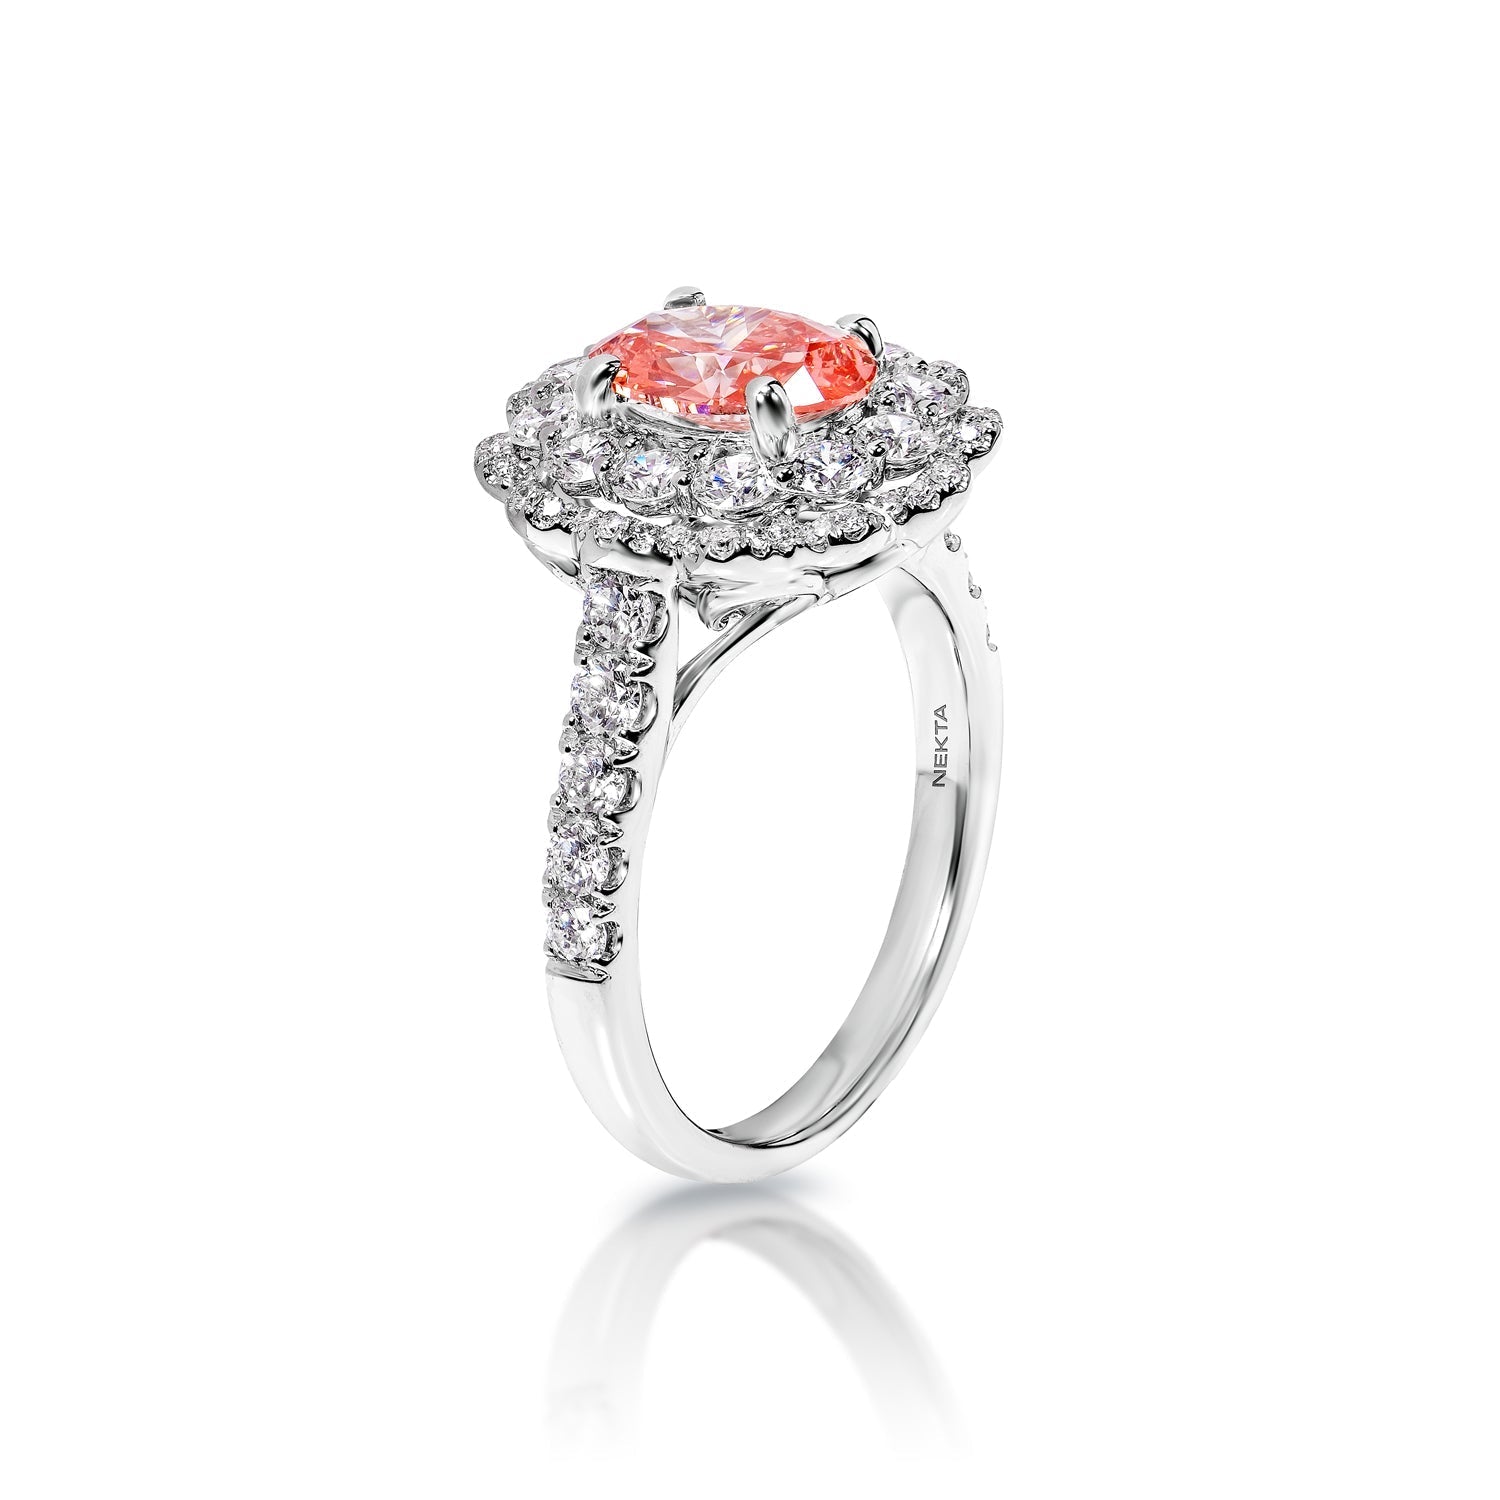 Miley 2 Carat Fancy Vivid Pink VS1 Oval Cut Diamond Engagement Ring in 18k White Gold Side View